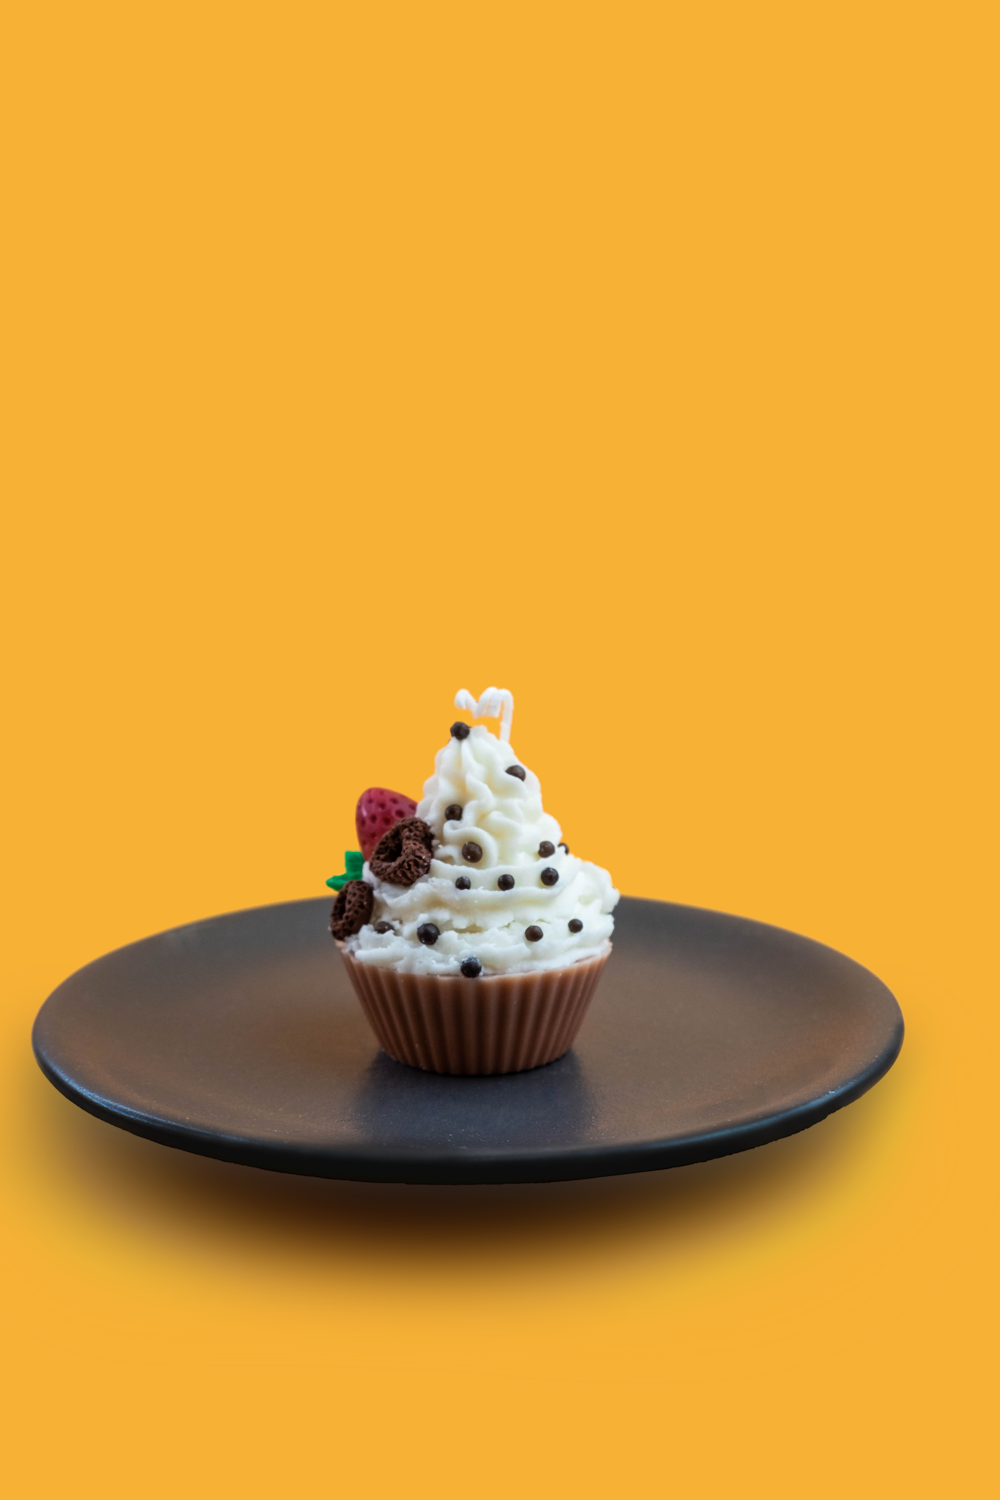 a cupcake with white frosting and sprinkles on a black plate